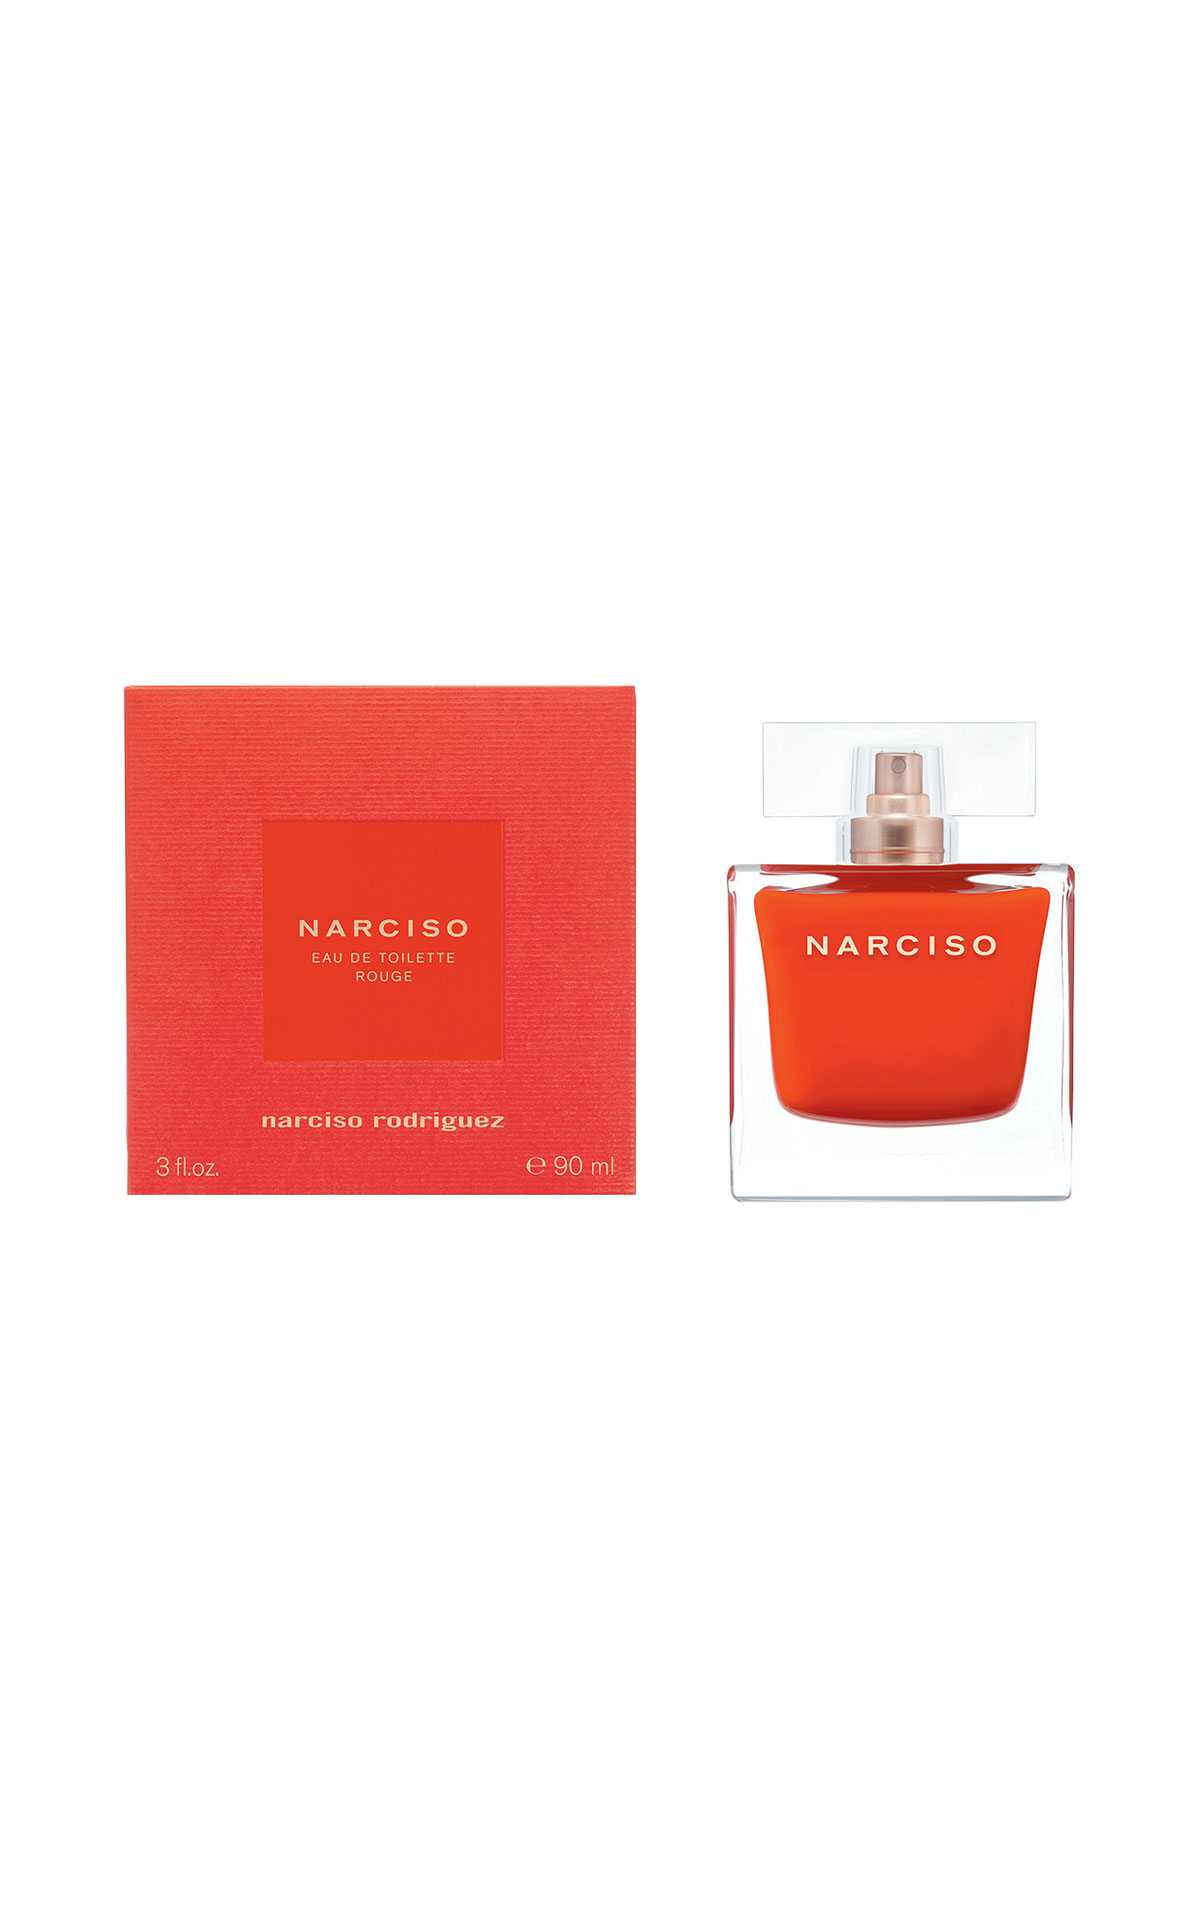 Narciso Rodriguez Narciso edt rouge 30ml from Bicester Village